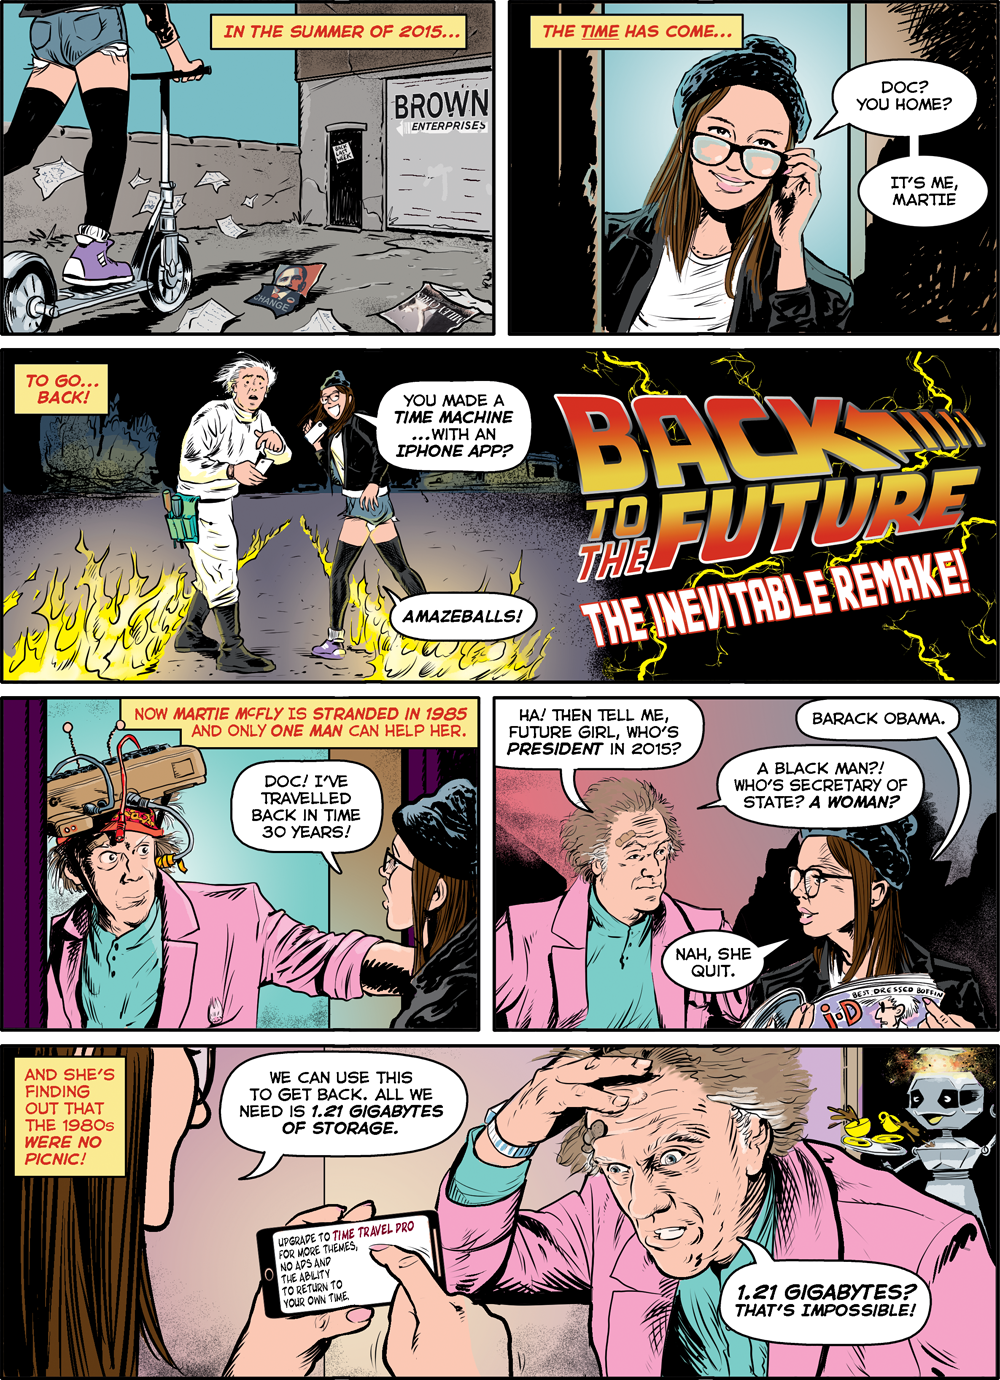 Back To The Future Remake pt1